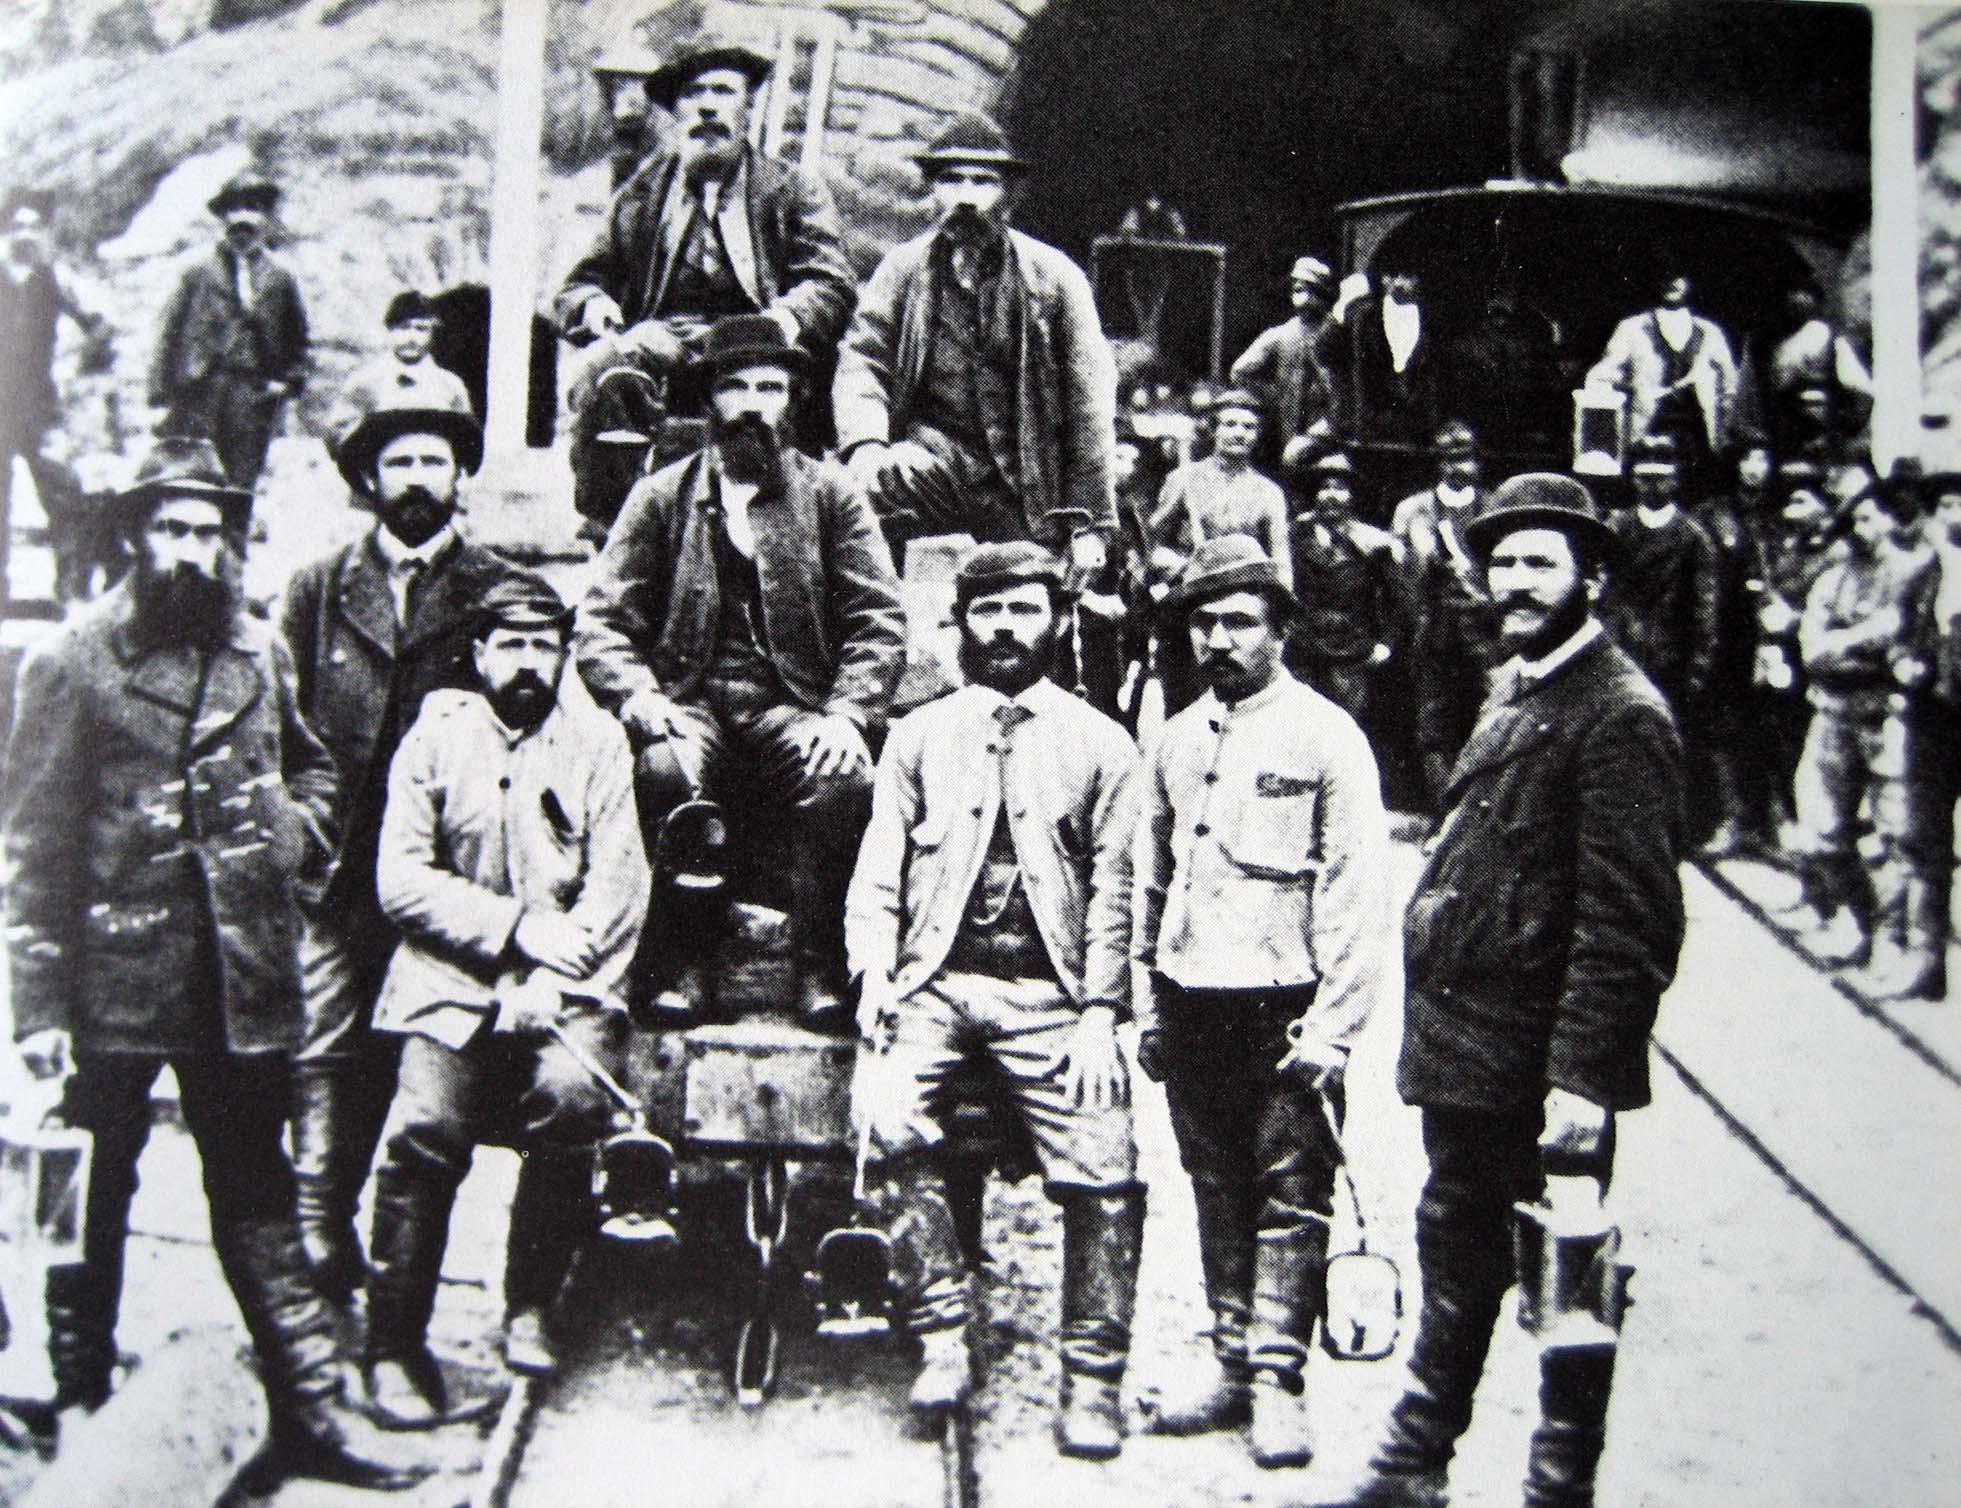 Construction workers around 1880 outside the southern portal of the Gotthard Tunnel in Airolo